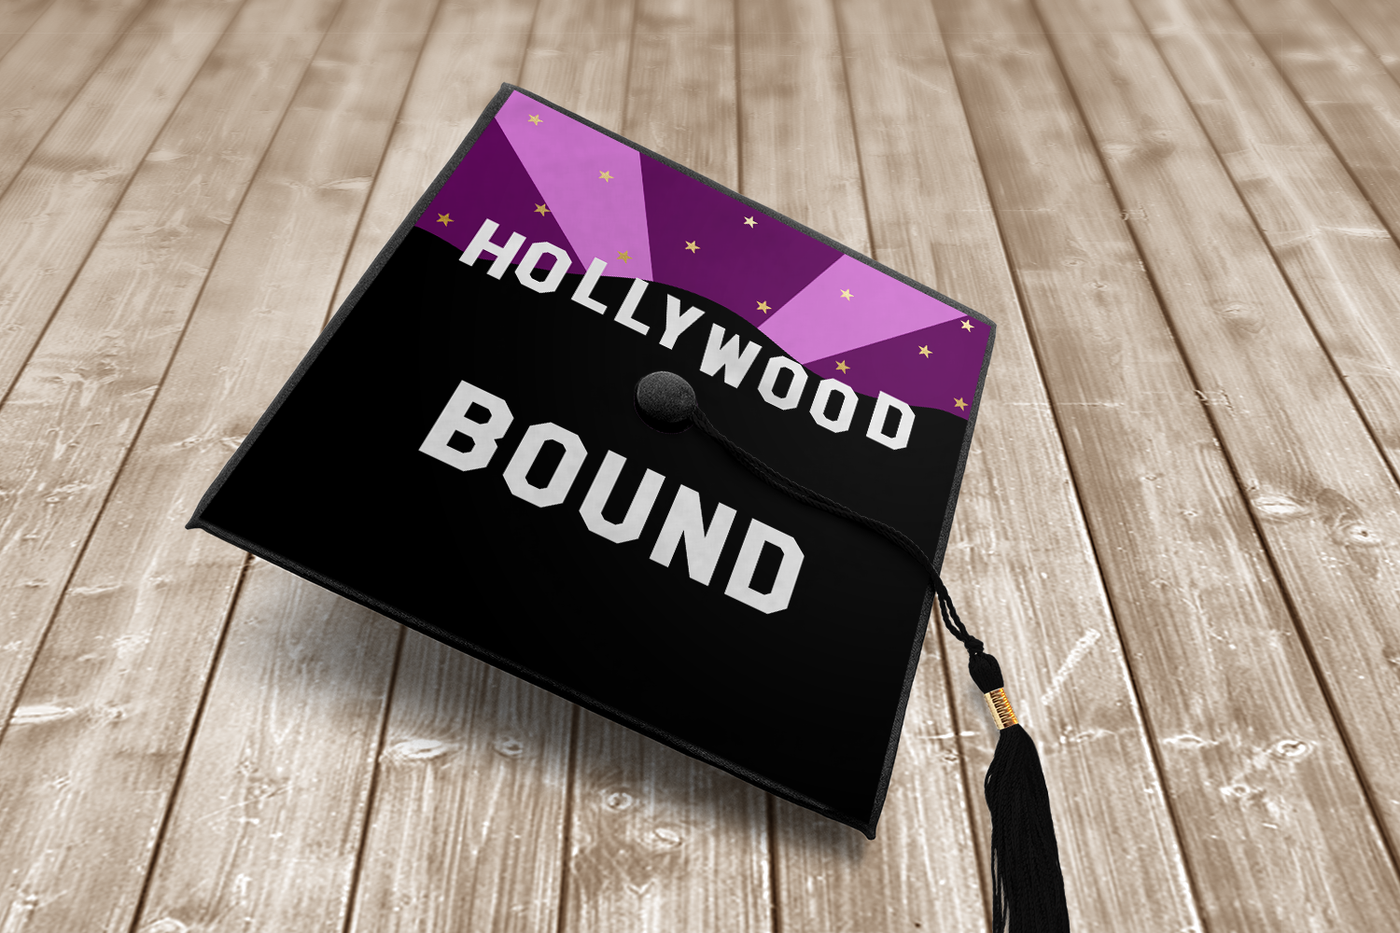 Graduation cap with design that says "Hollywood bound" with a starry night sky and hill silhouette.